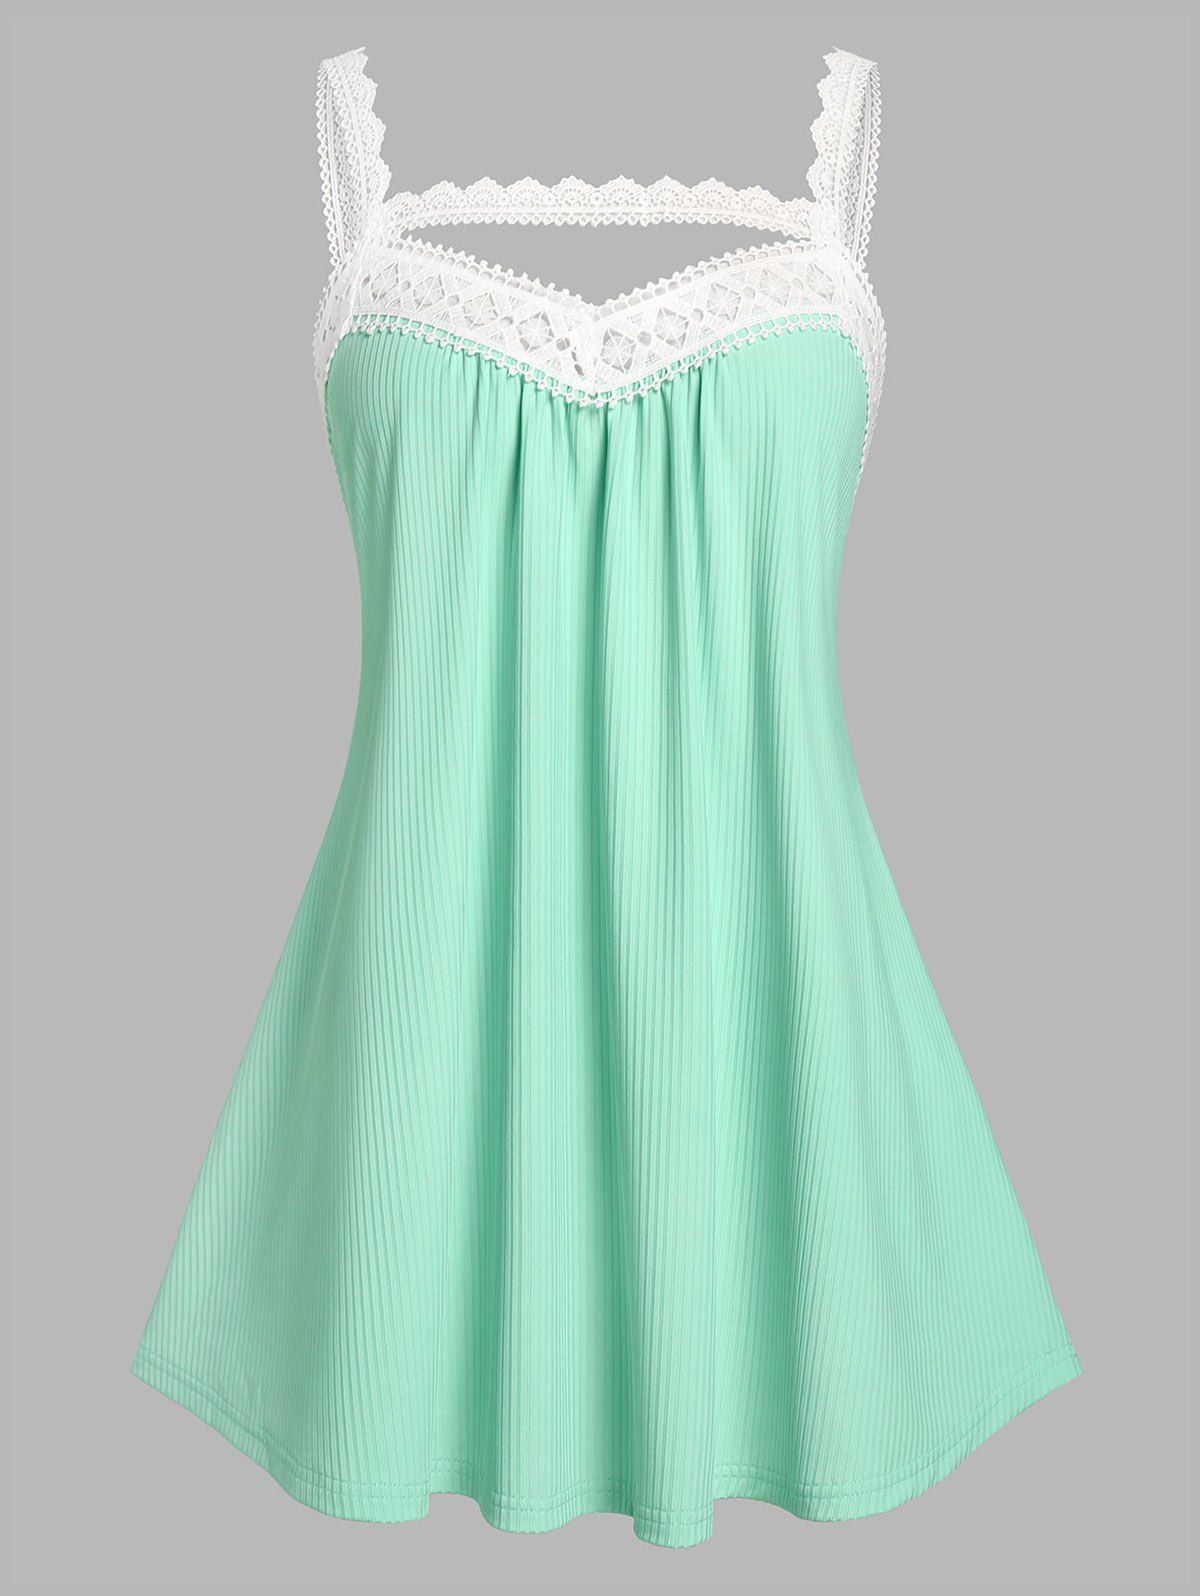 Plus Size Lace Strap Ribbed Tank Top - LIGHT GREEN 2X